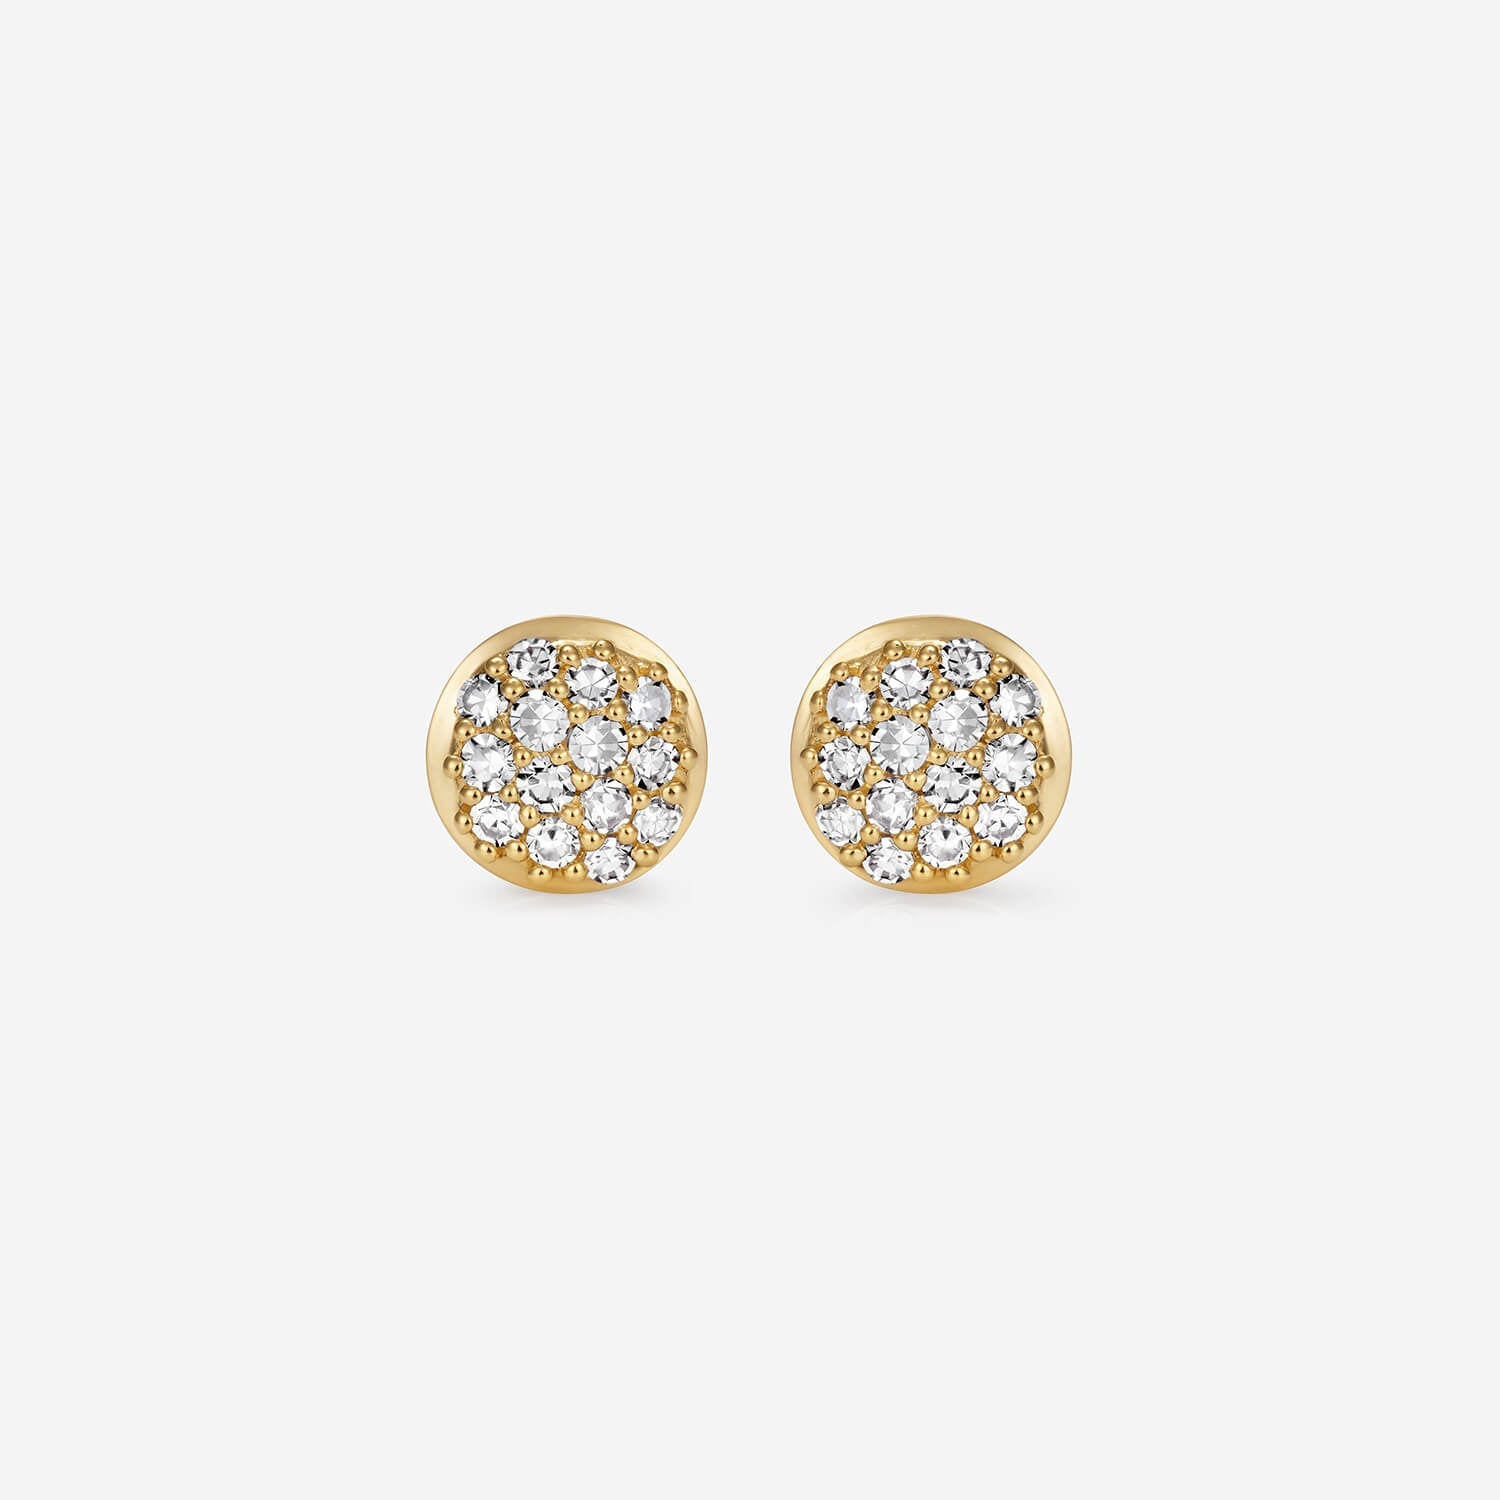 886 Royal Mint Earrings 886 Pavé Studs in 18ct Yellow Gold